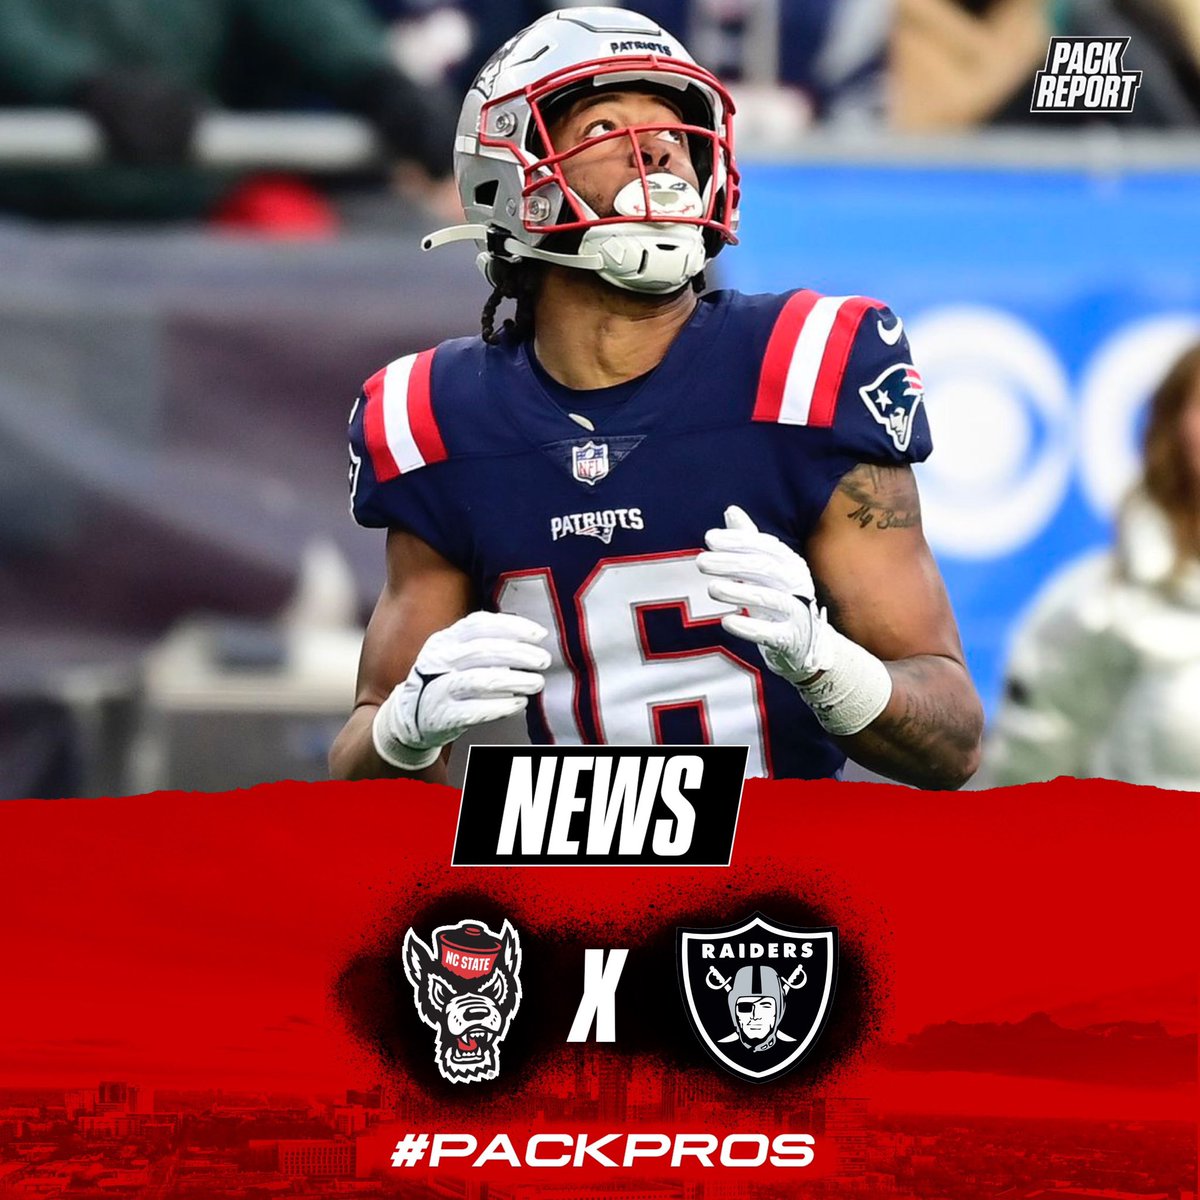 Jakobi Meyers is signing with the Raiders on a 3-year, $33M contract with $21M guaranteed. 💰 #PackPros